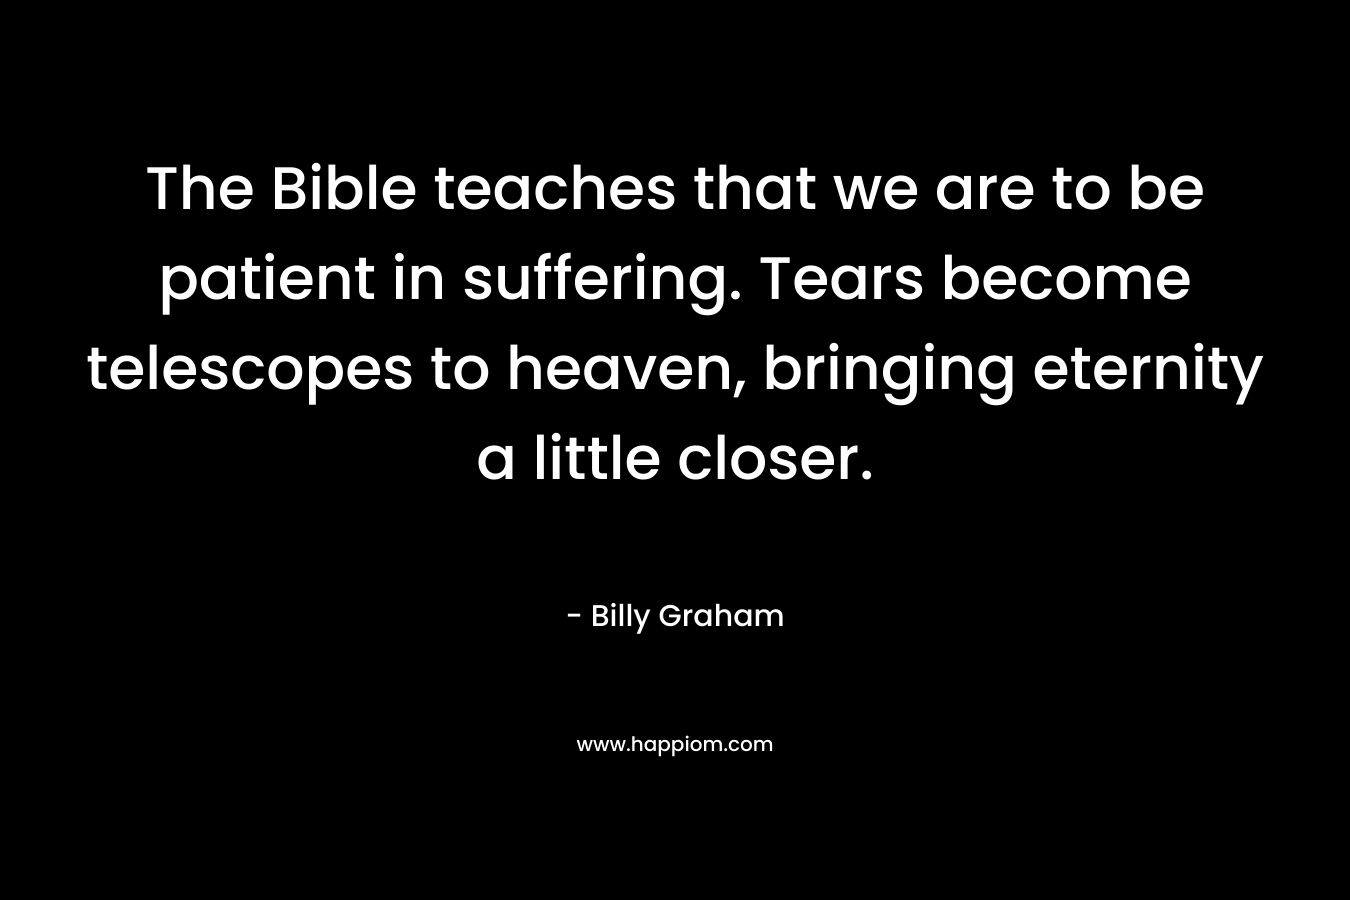 The Bible teaches that we are to be patient in suffering. Tears become telescopes to heaven, bringing eternity a little closer. – Billy Graham